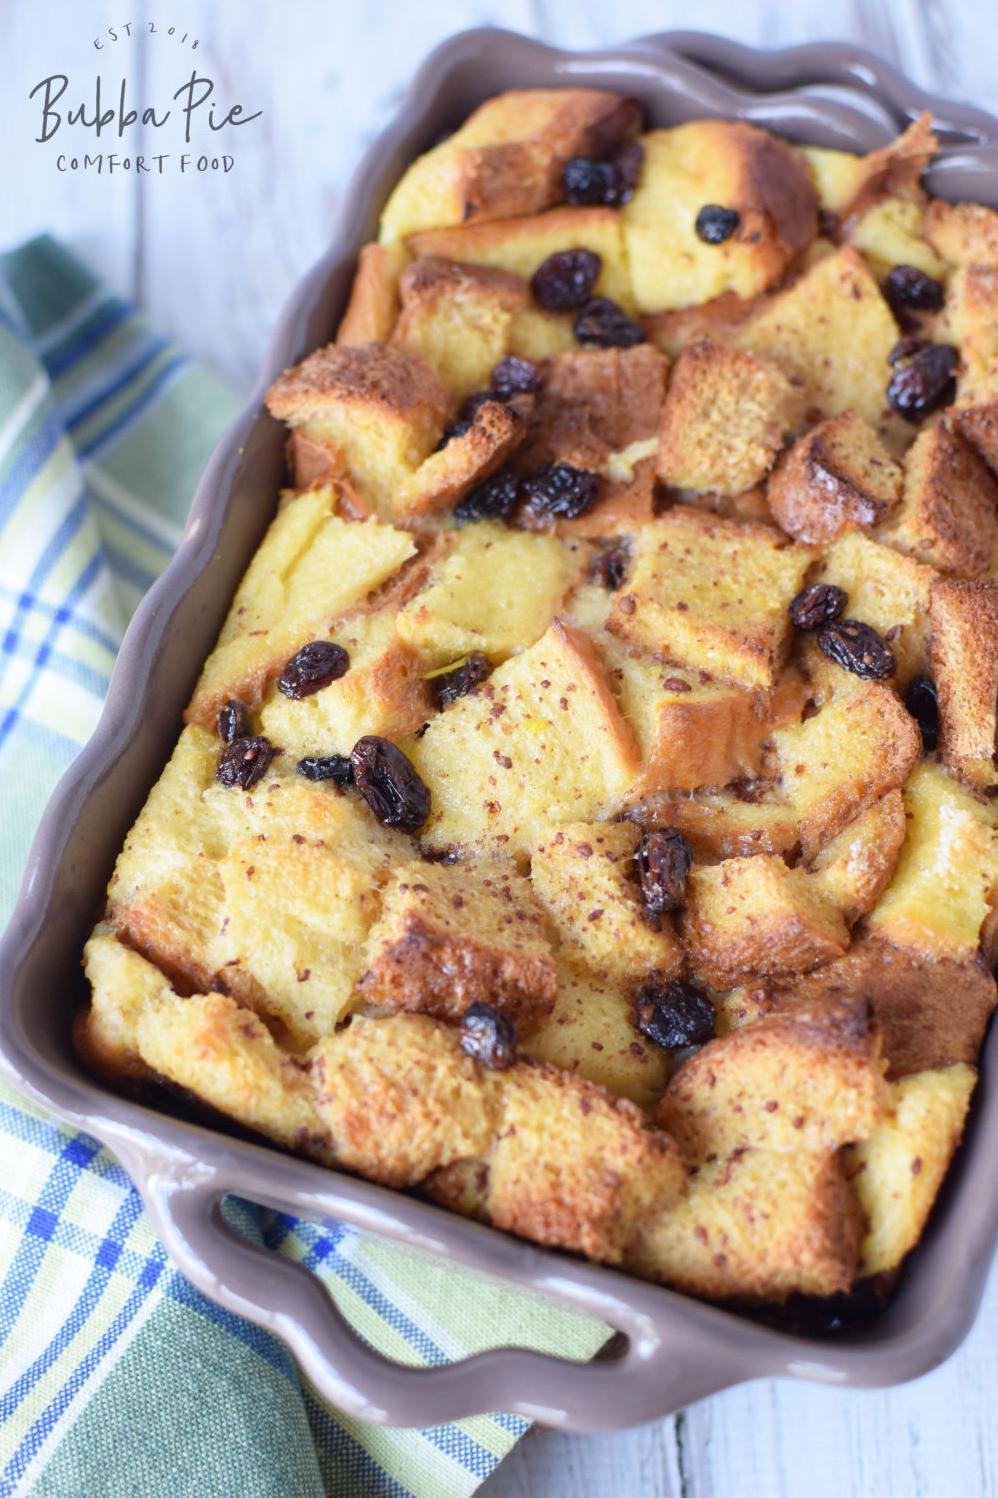  Bring the flavors of the South to your table with this easy bread pudding recipe.